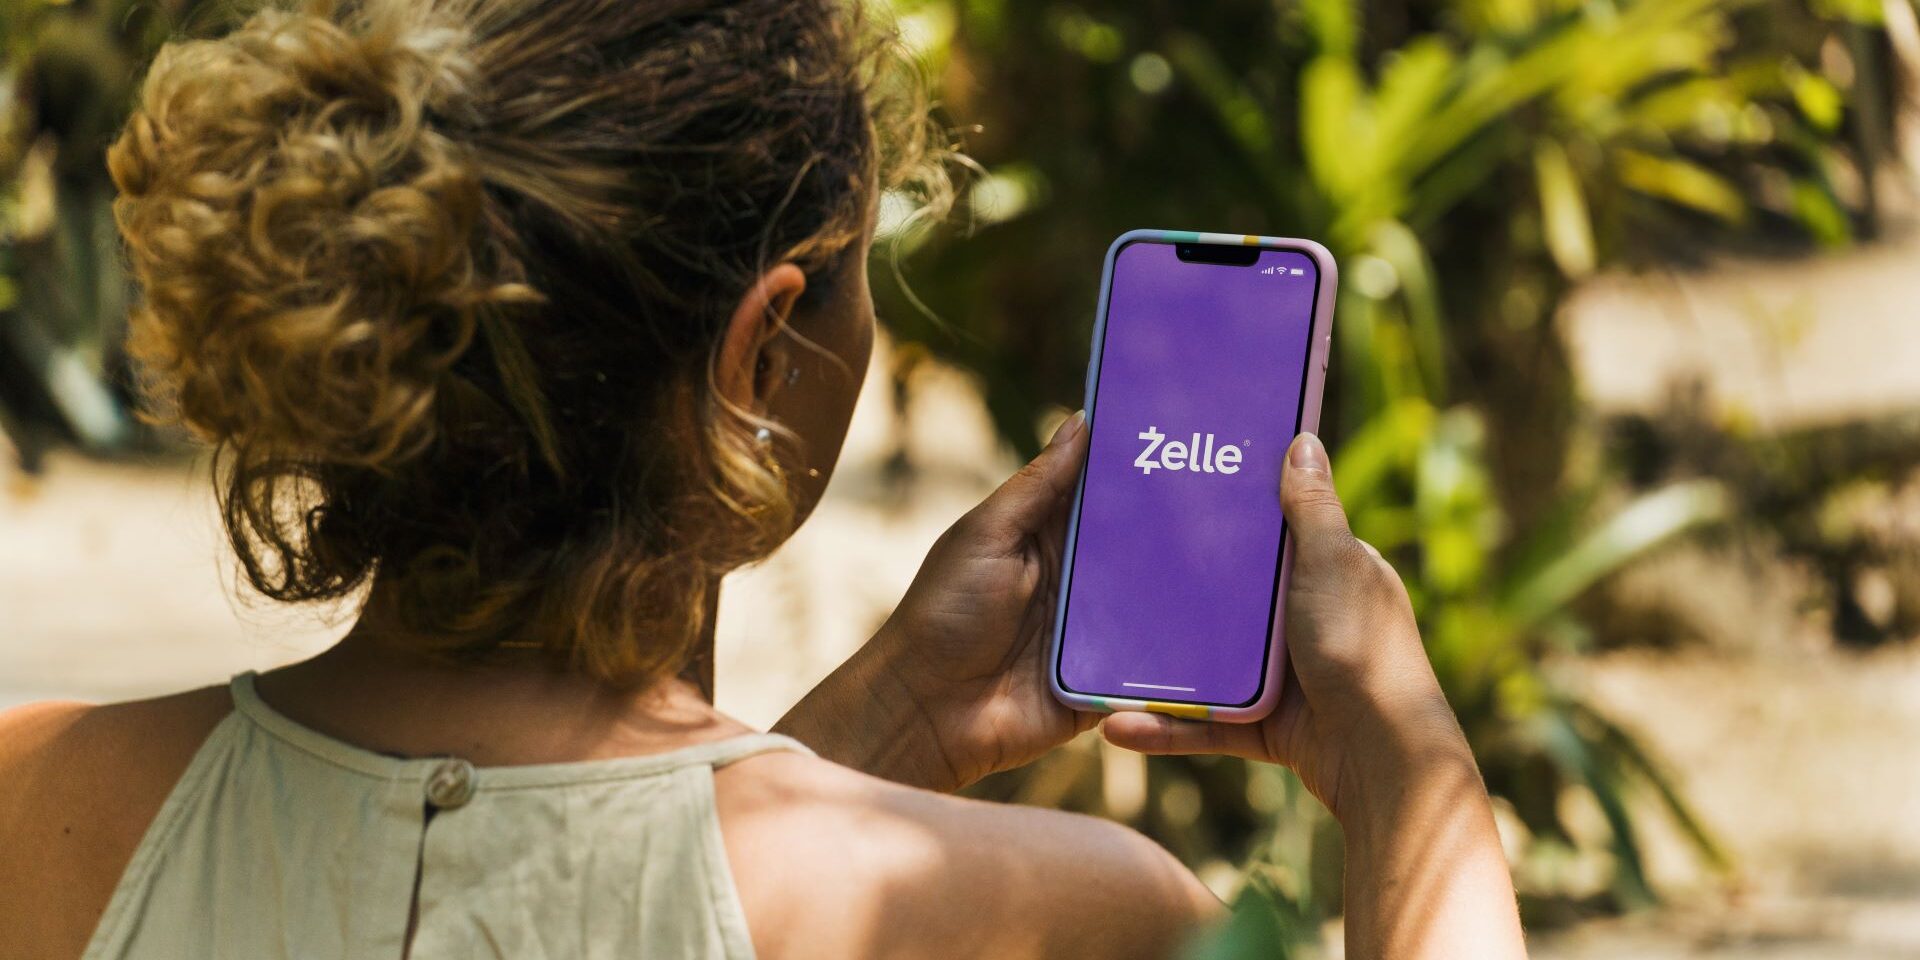 How To Pronounce Zelle